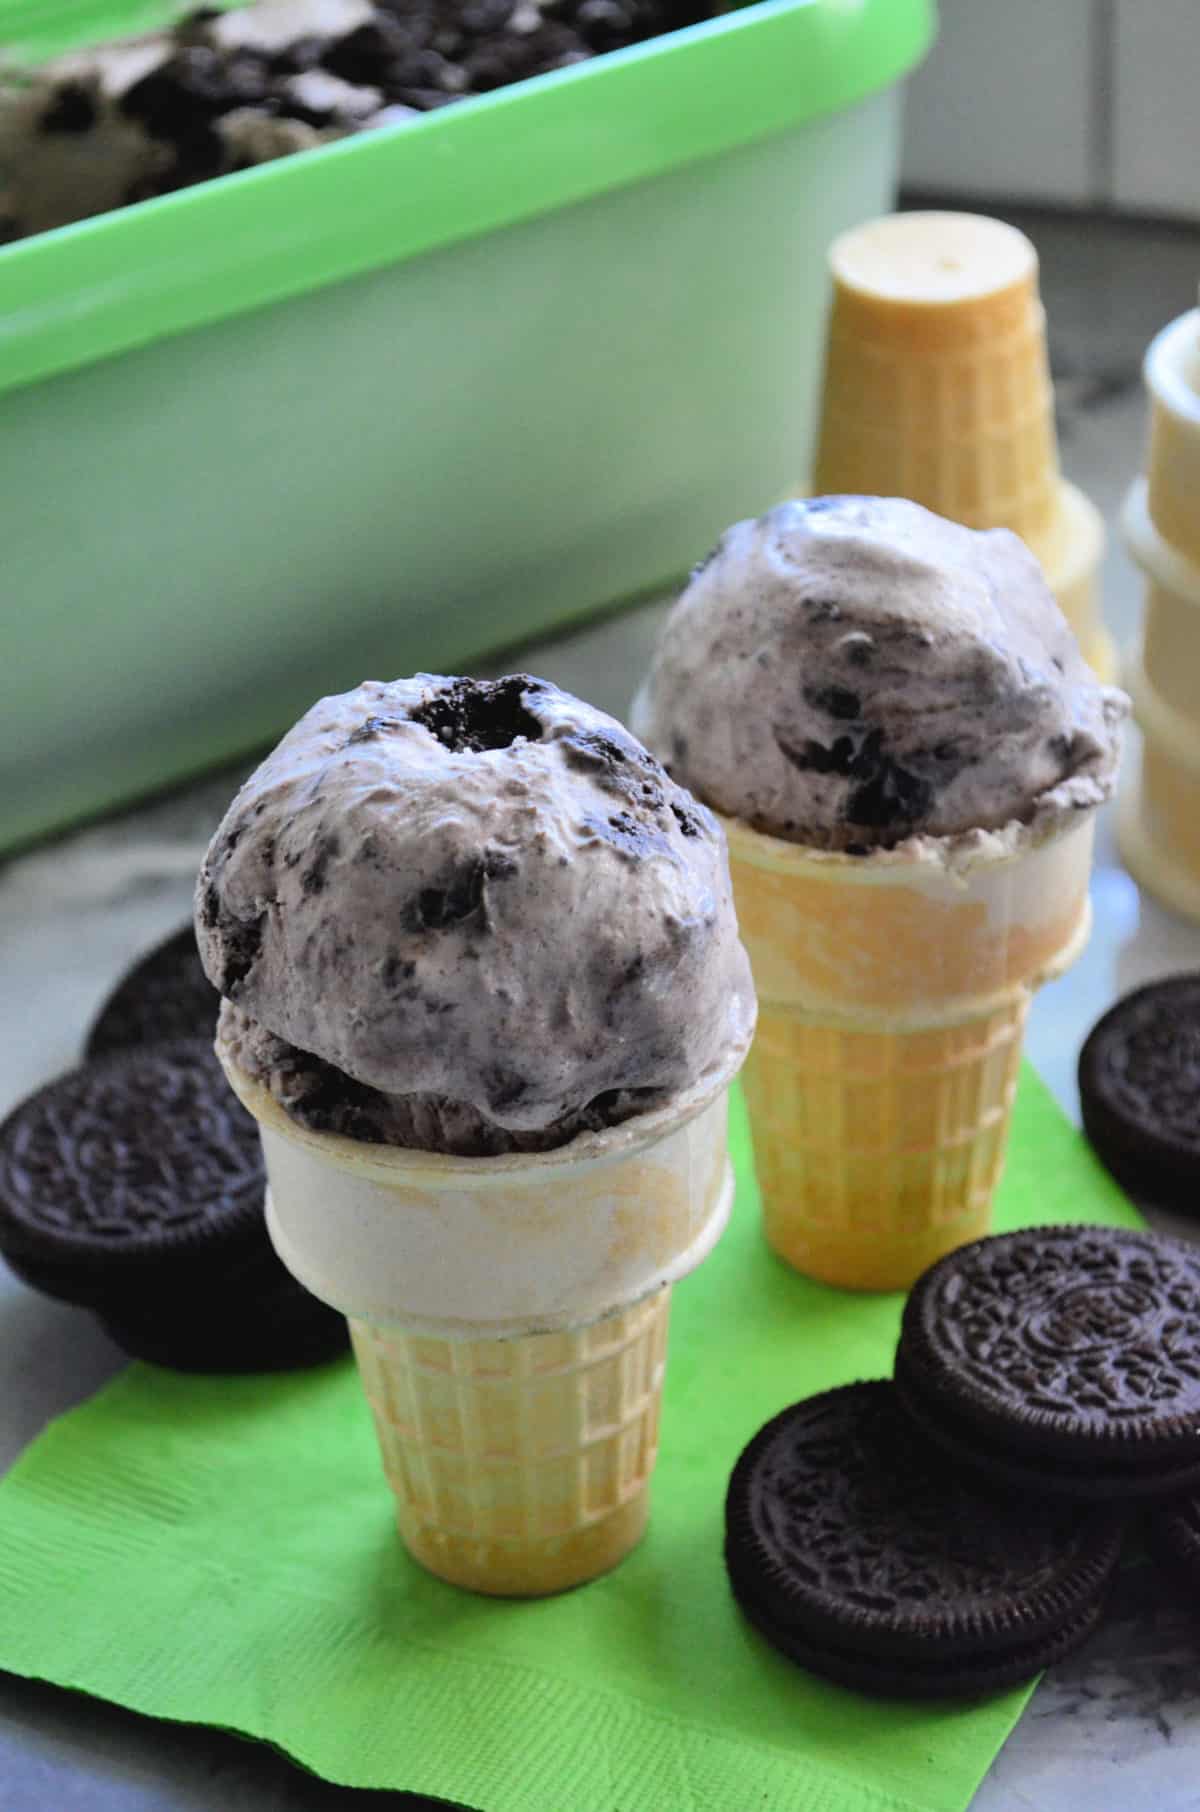 Two cake cones filled with Cookies and Cream Ice Cream with cones and oreo cookies in background.